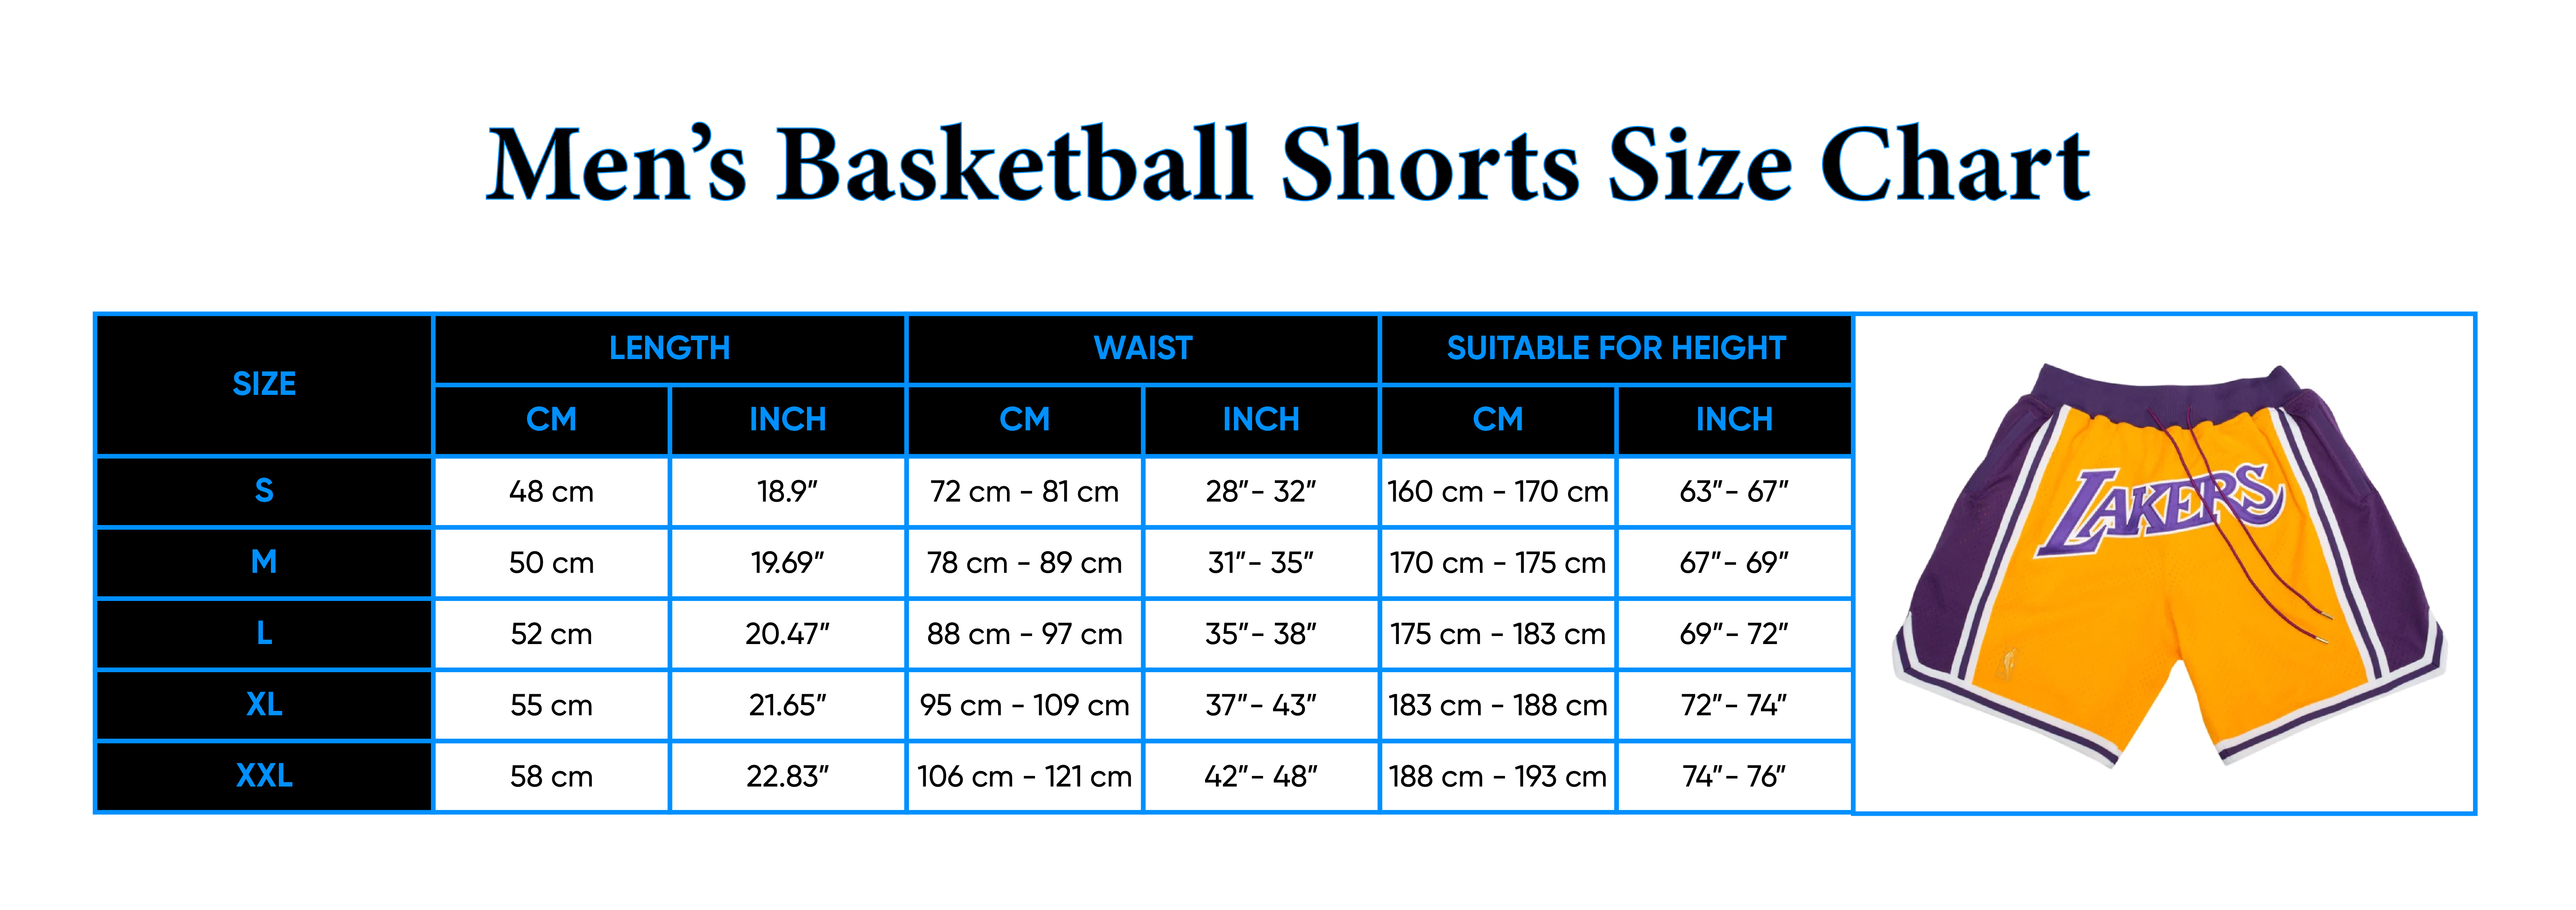 Retro Memphis Grizzlies Basketball Shorts – Jerseys and Sneakers